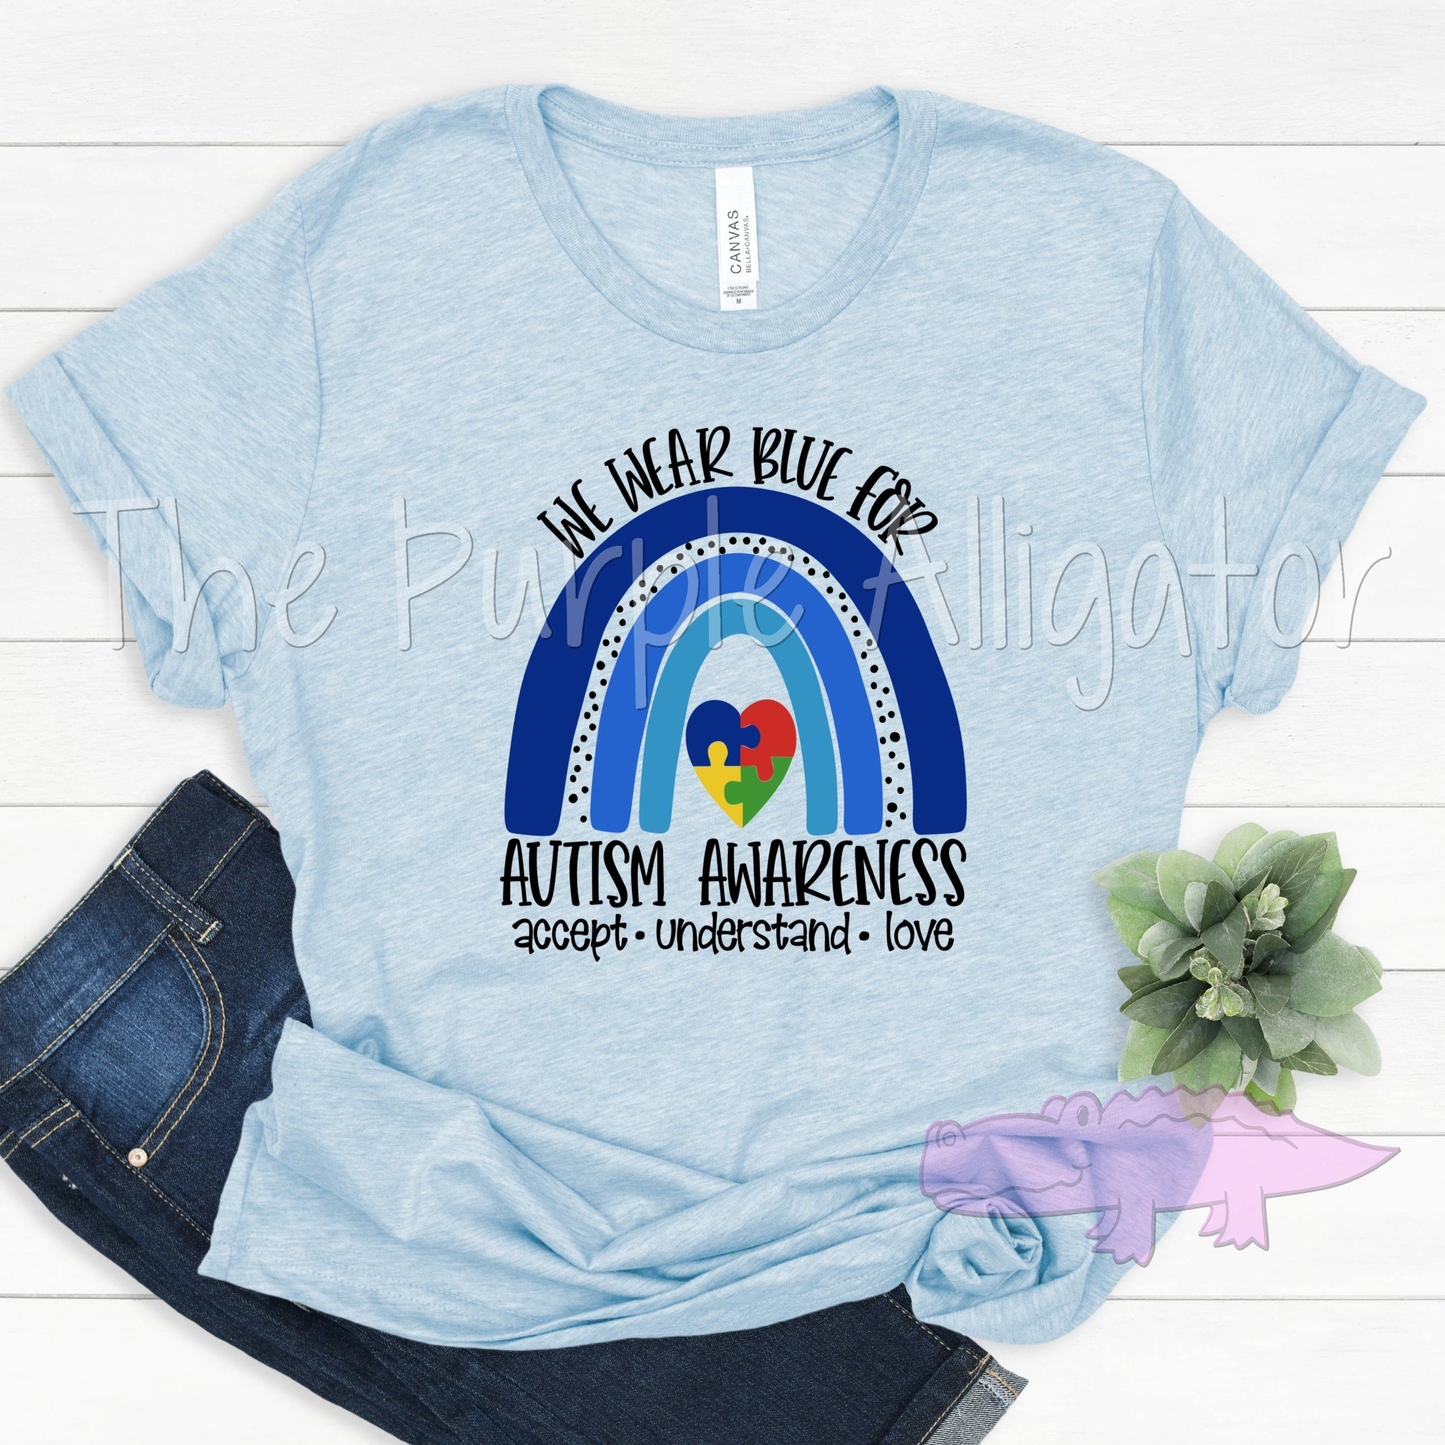 We Wear Blue for Autism Awareness  (fc OB)